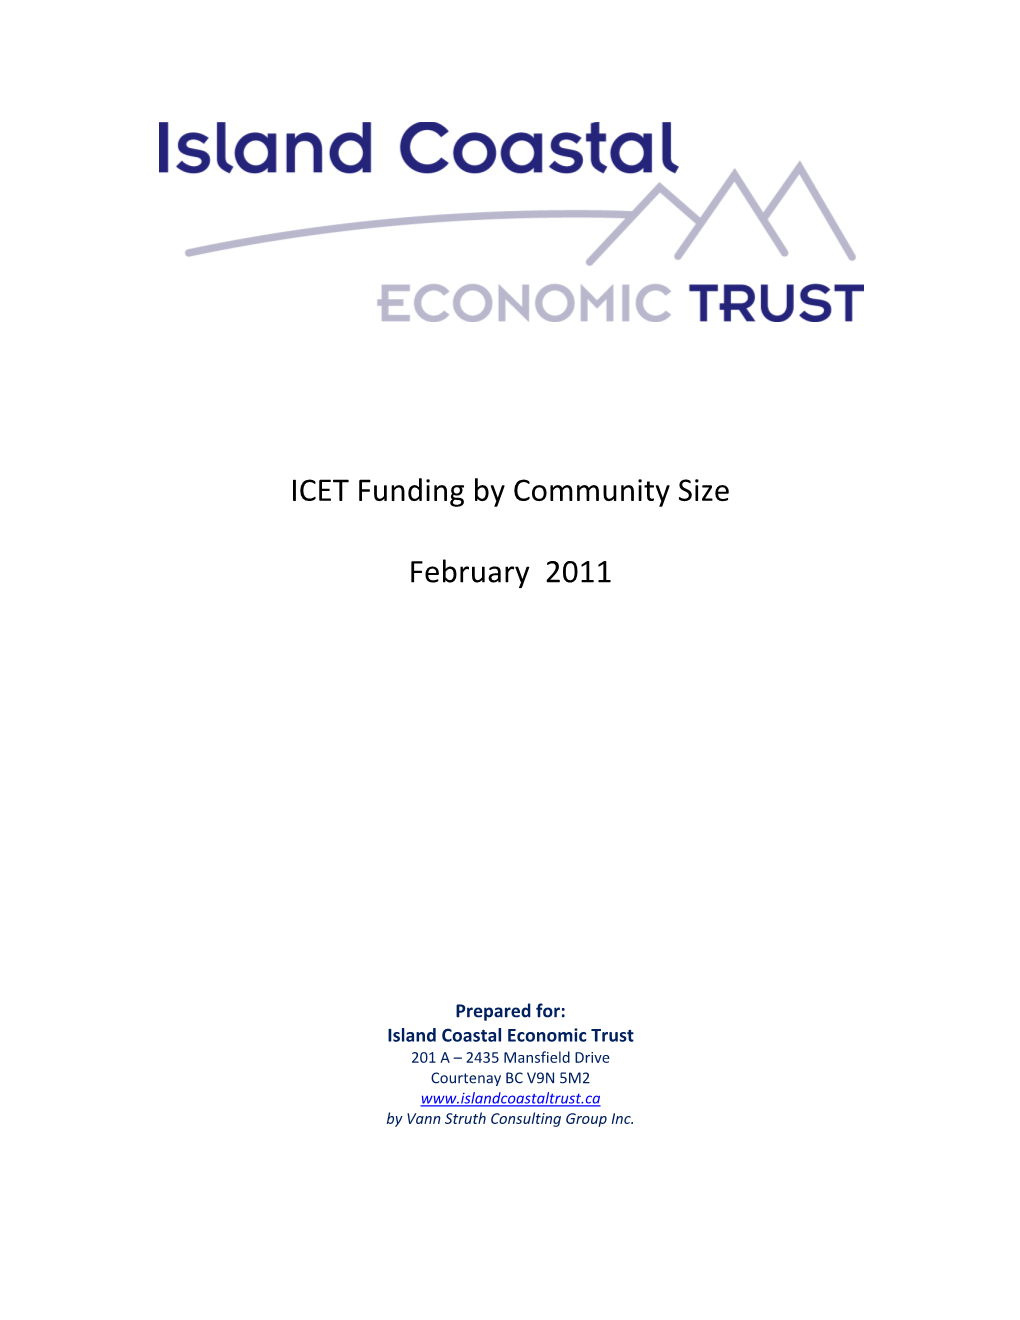 ICET Funding by Community Size February 2011